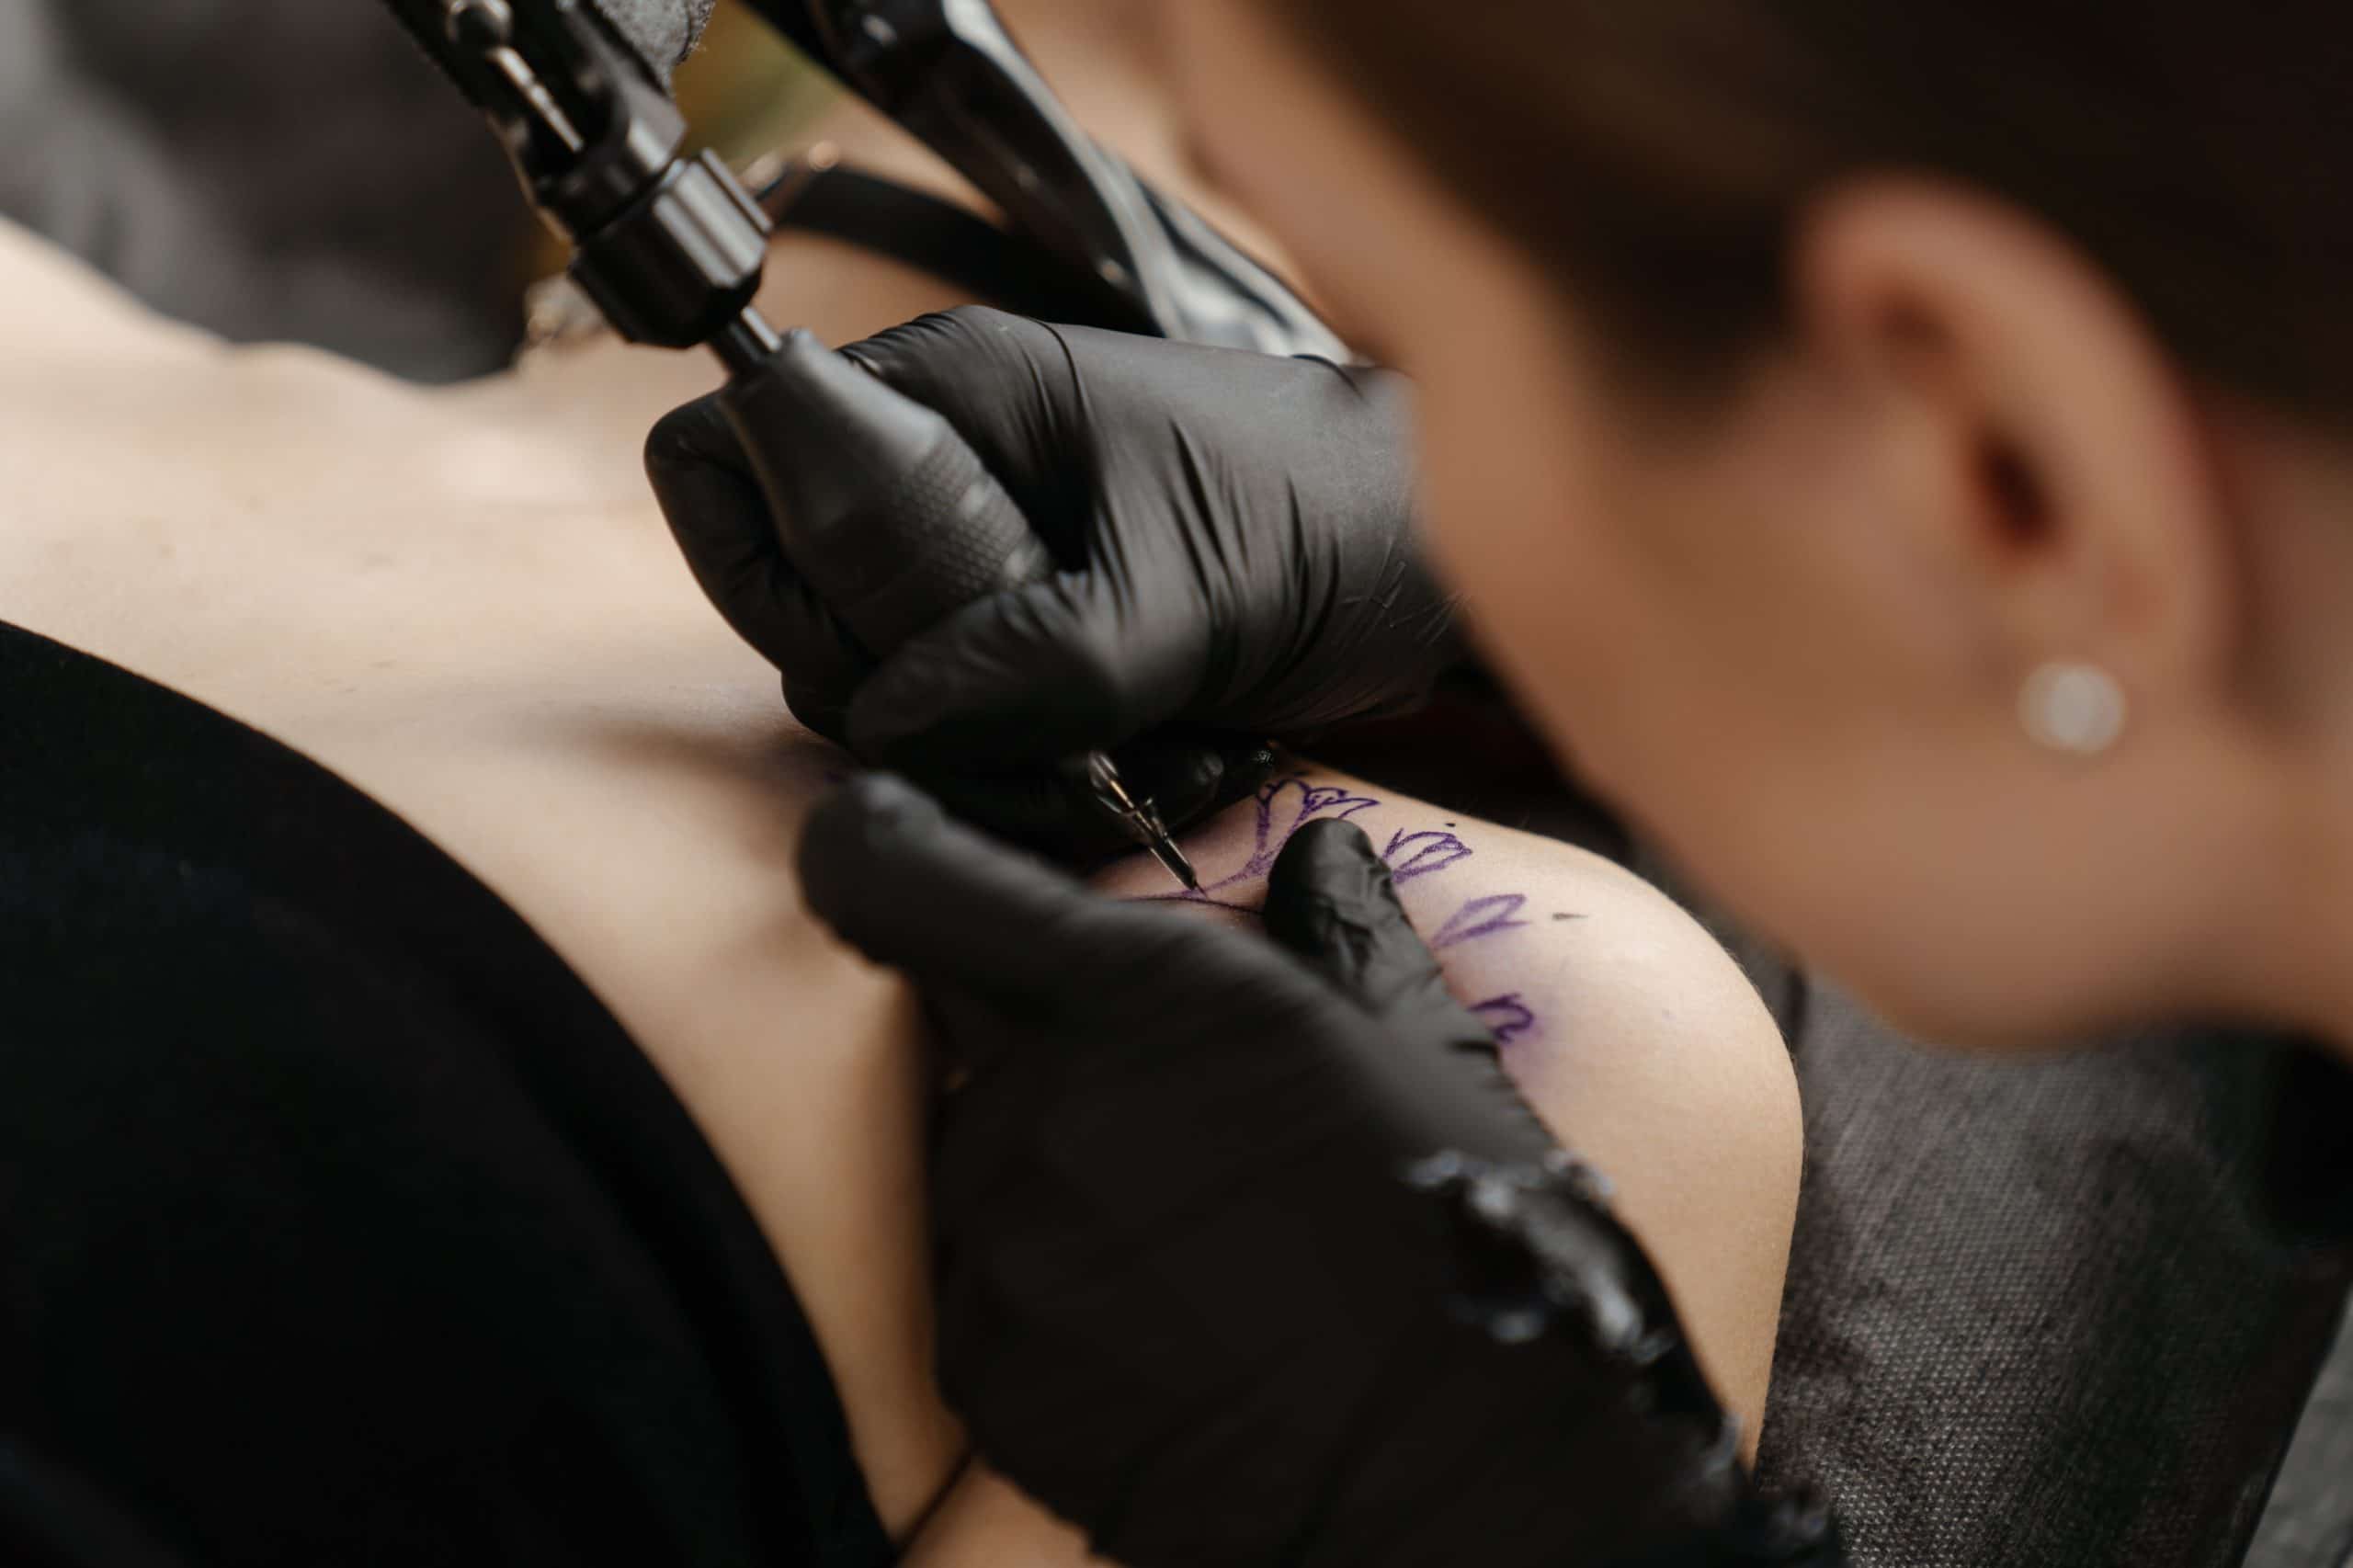 Remove Your Tattoo With Laser Tattoo Removal At Azia Med Spa